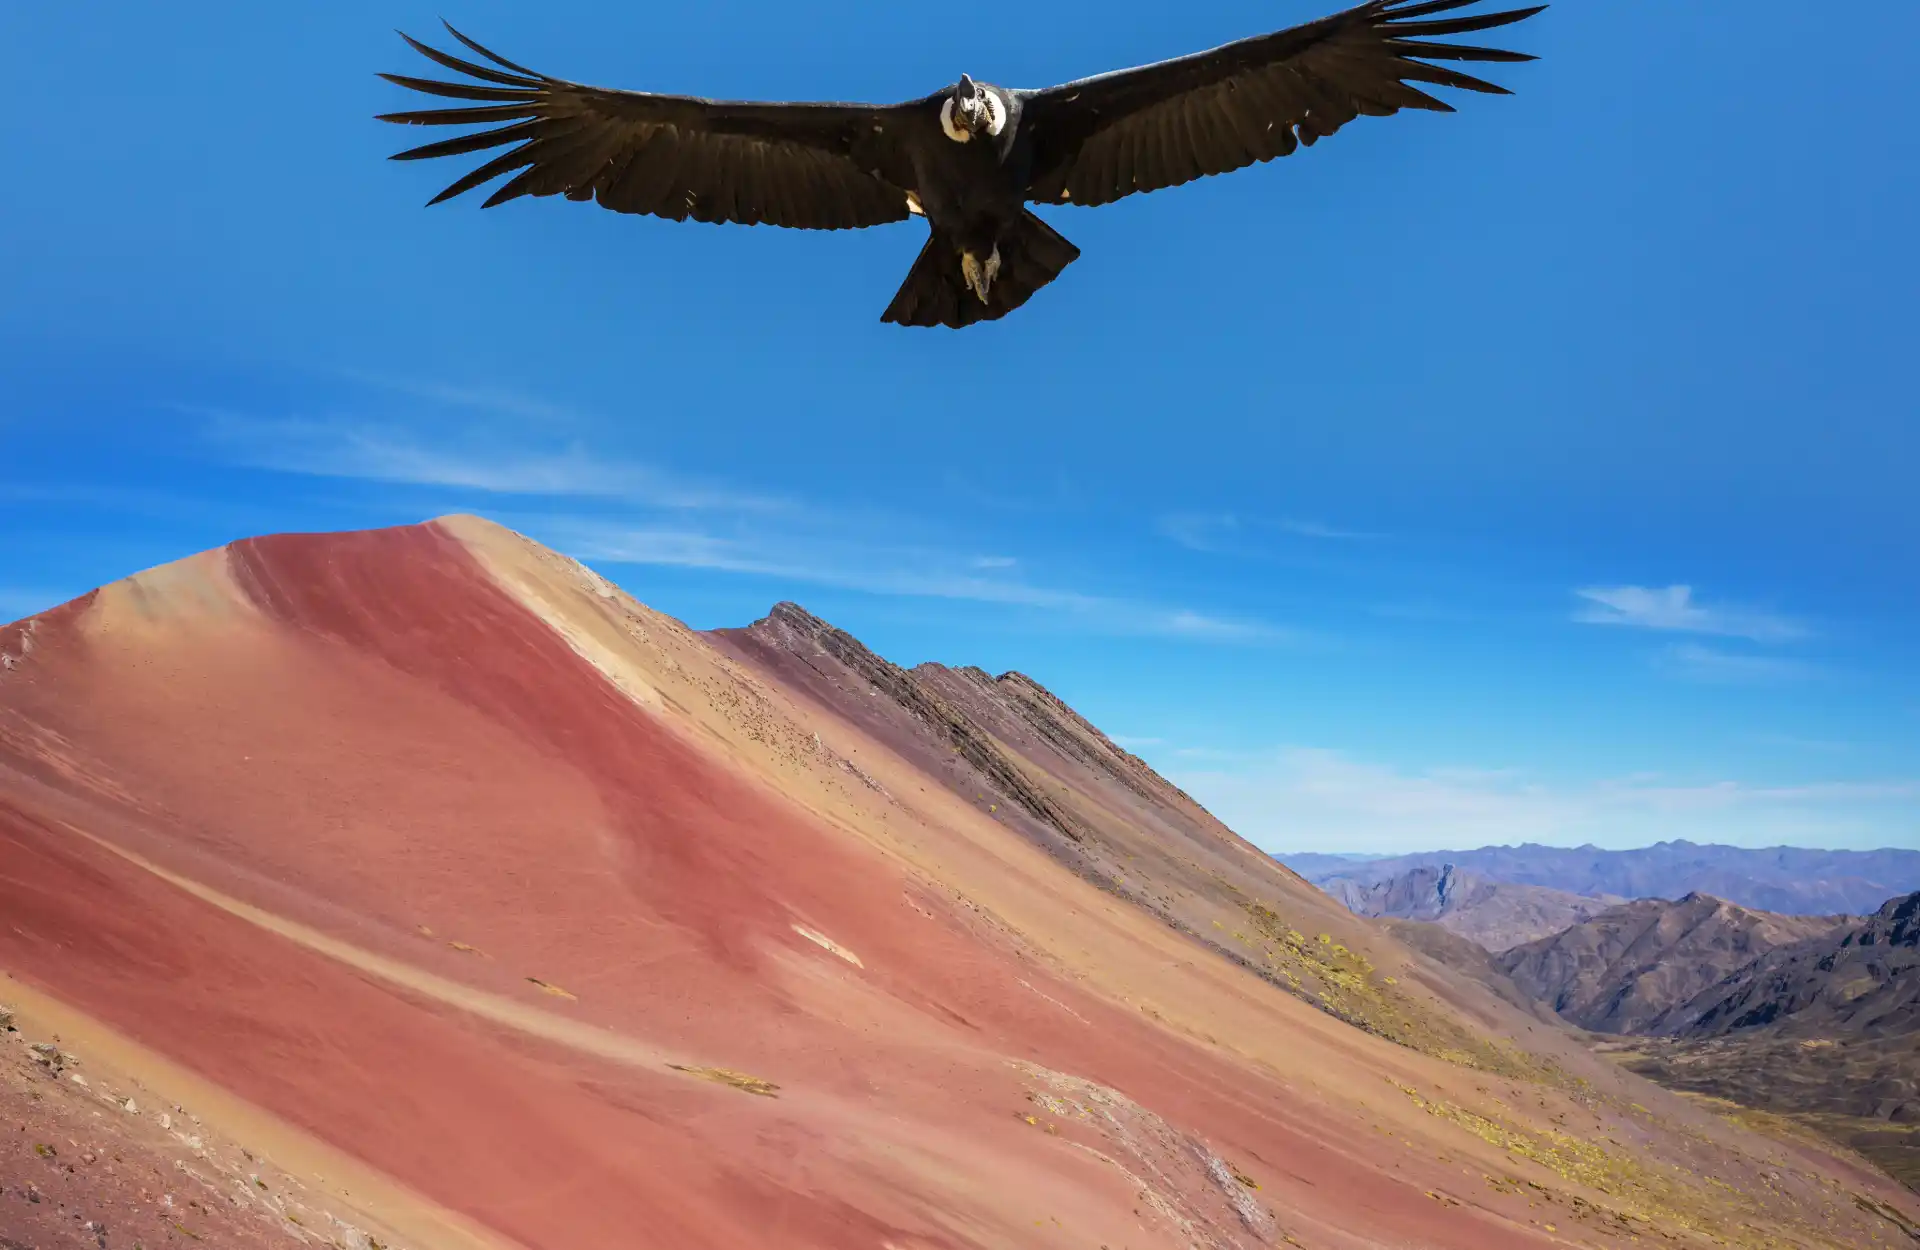 A condor flies over the Red mountains range that surround Vinicunca.